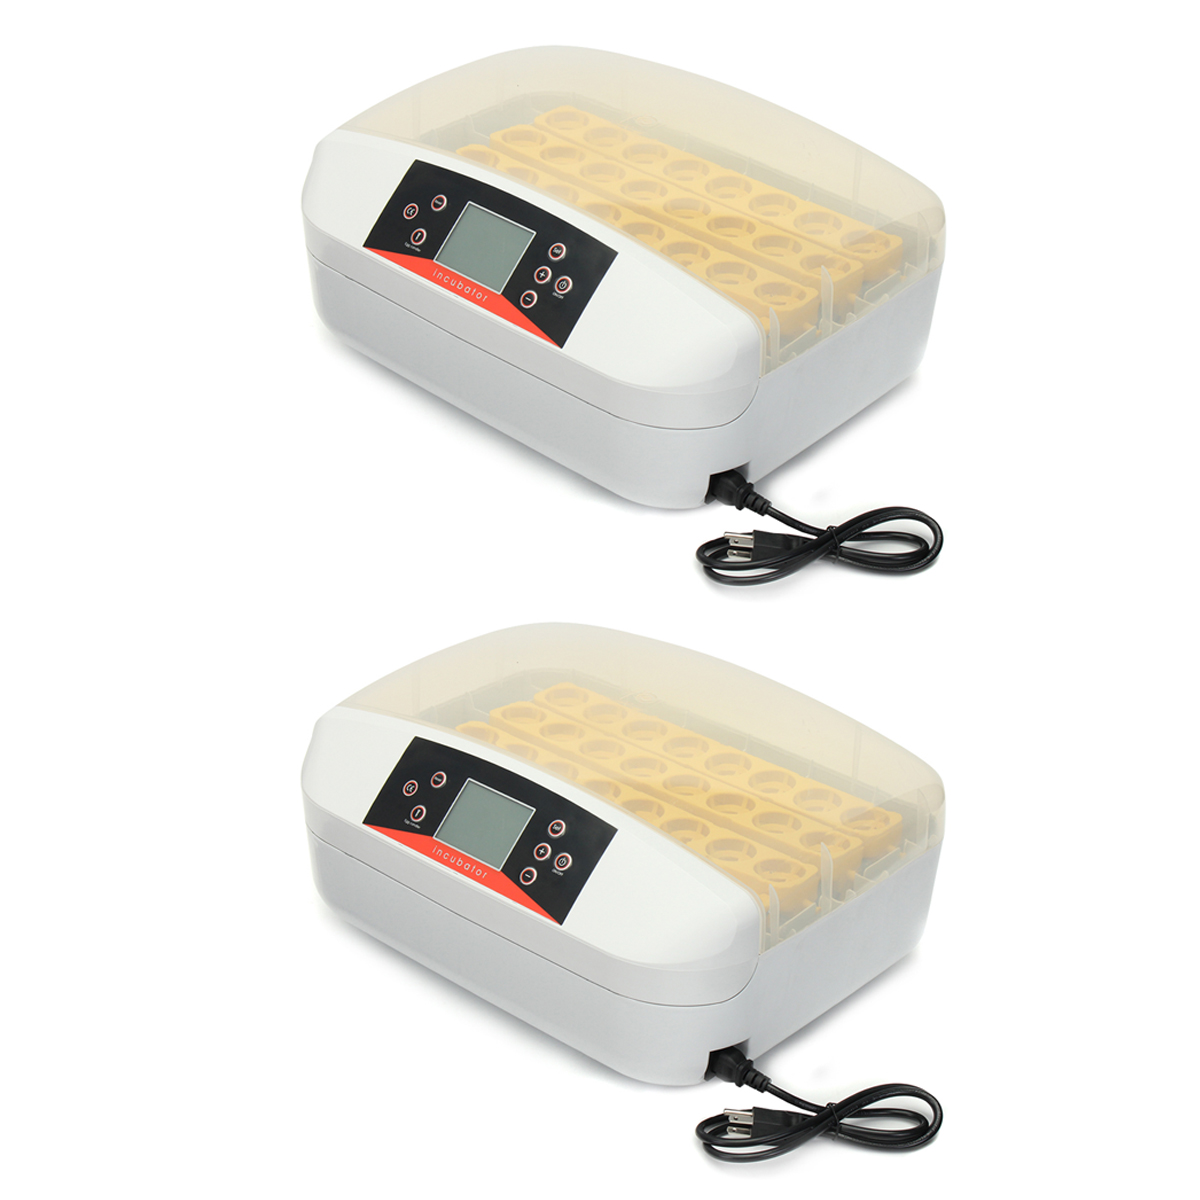 

32 Position Electronic Digital Incubator Automatic Hatcher for Poultry Eggs Chicken Egg